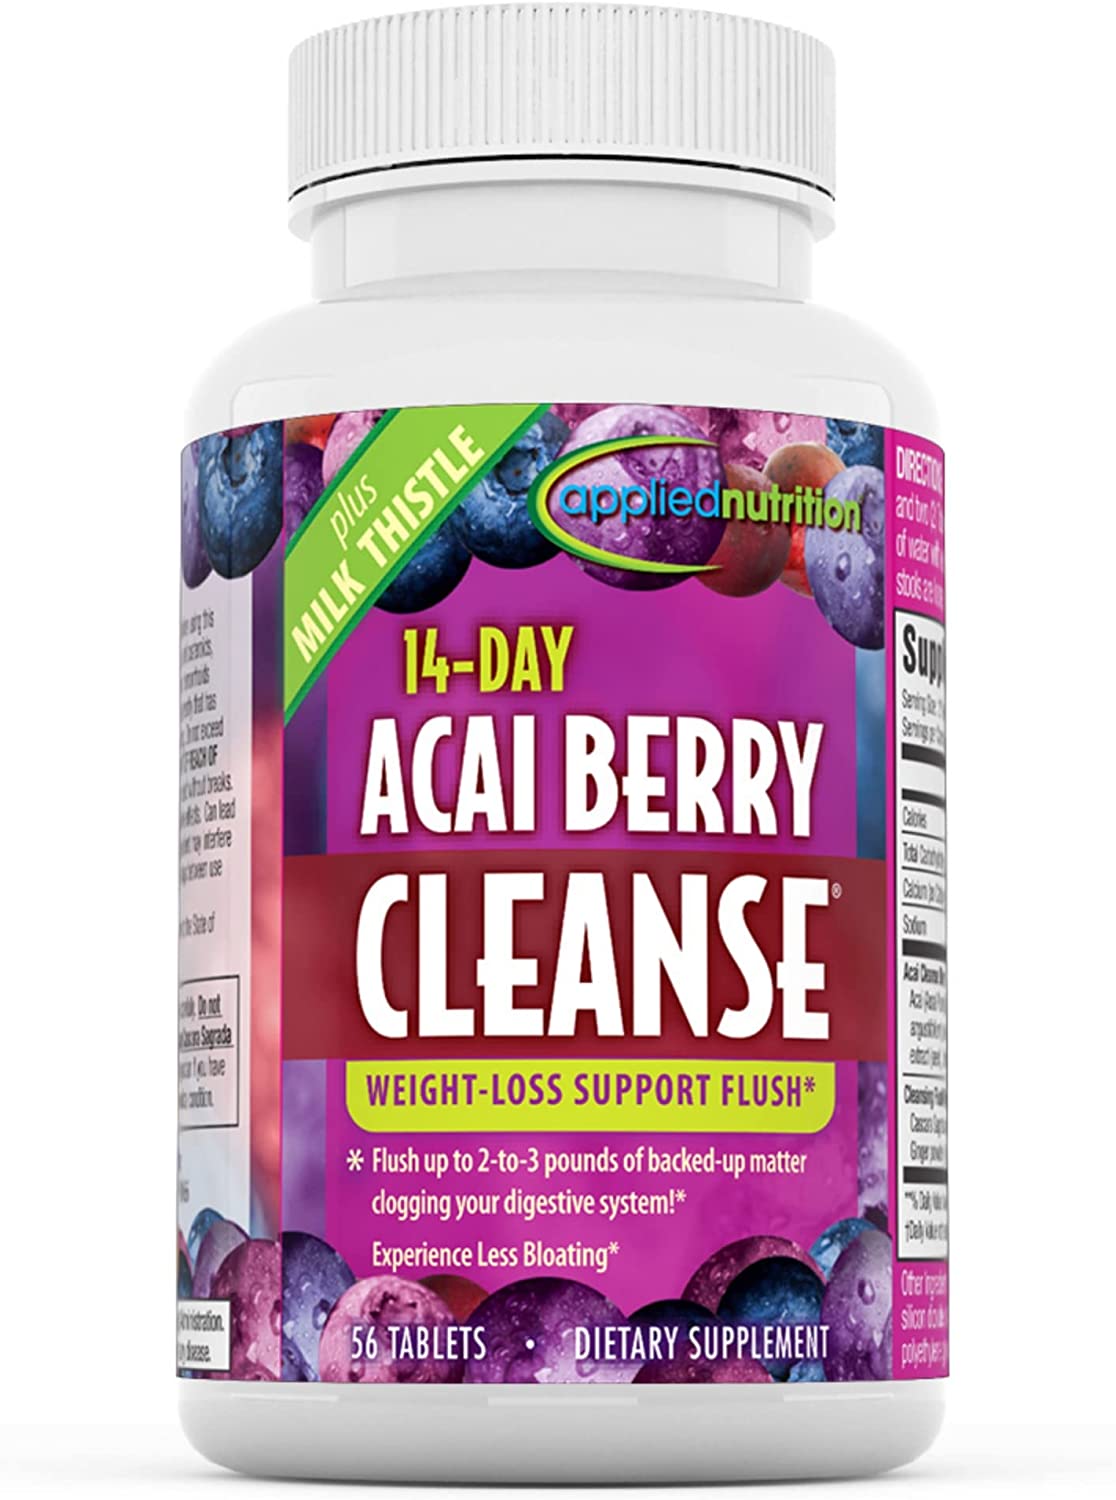 Applied Nutrition Acai Berry Cleanse Weight-Loss Support Flush Supplement Tablet, 56 Ct - image 4 of 7